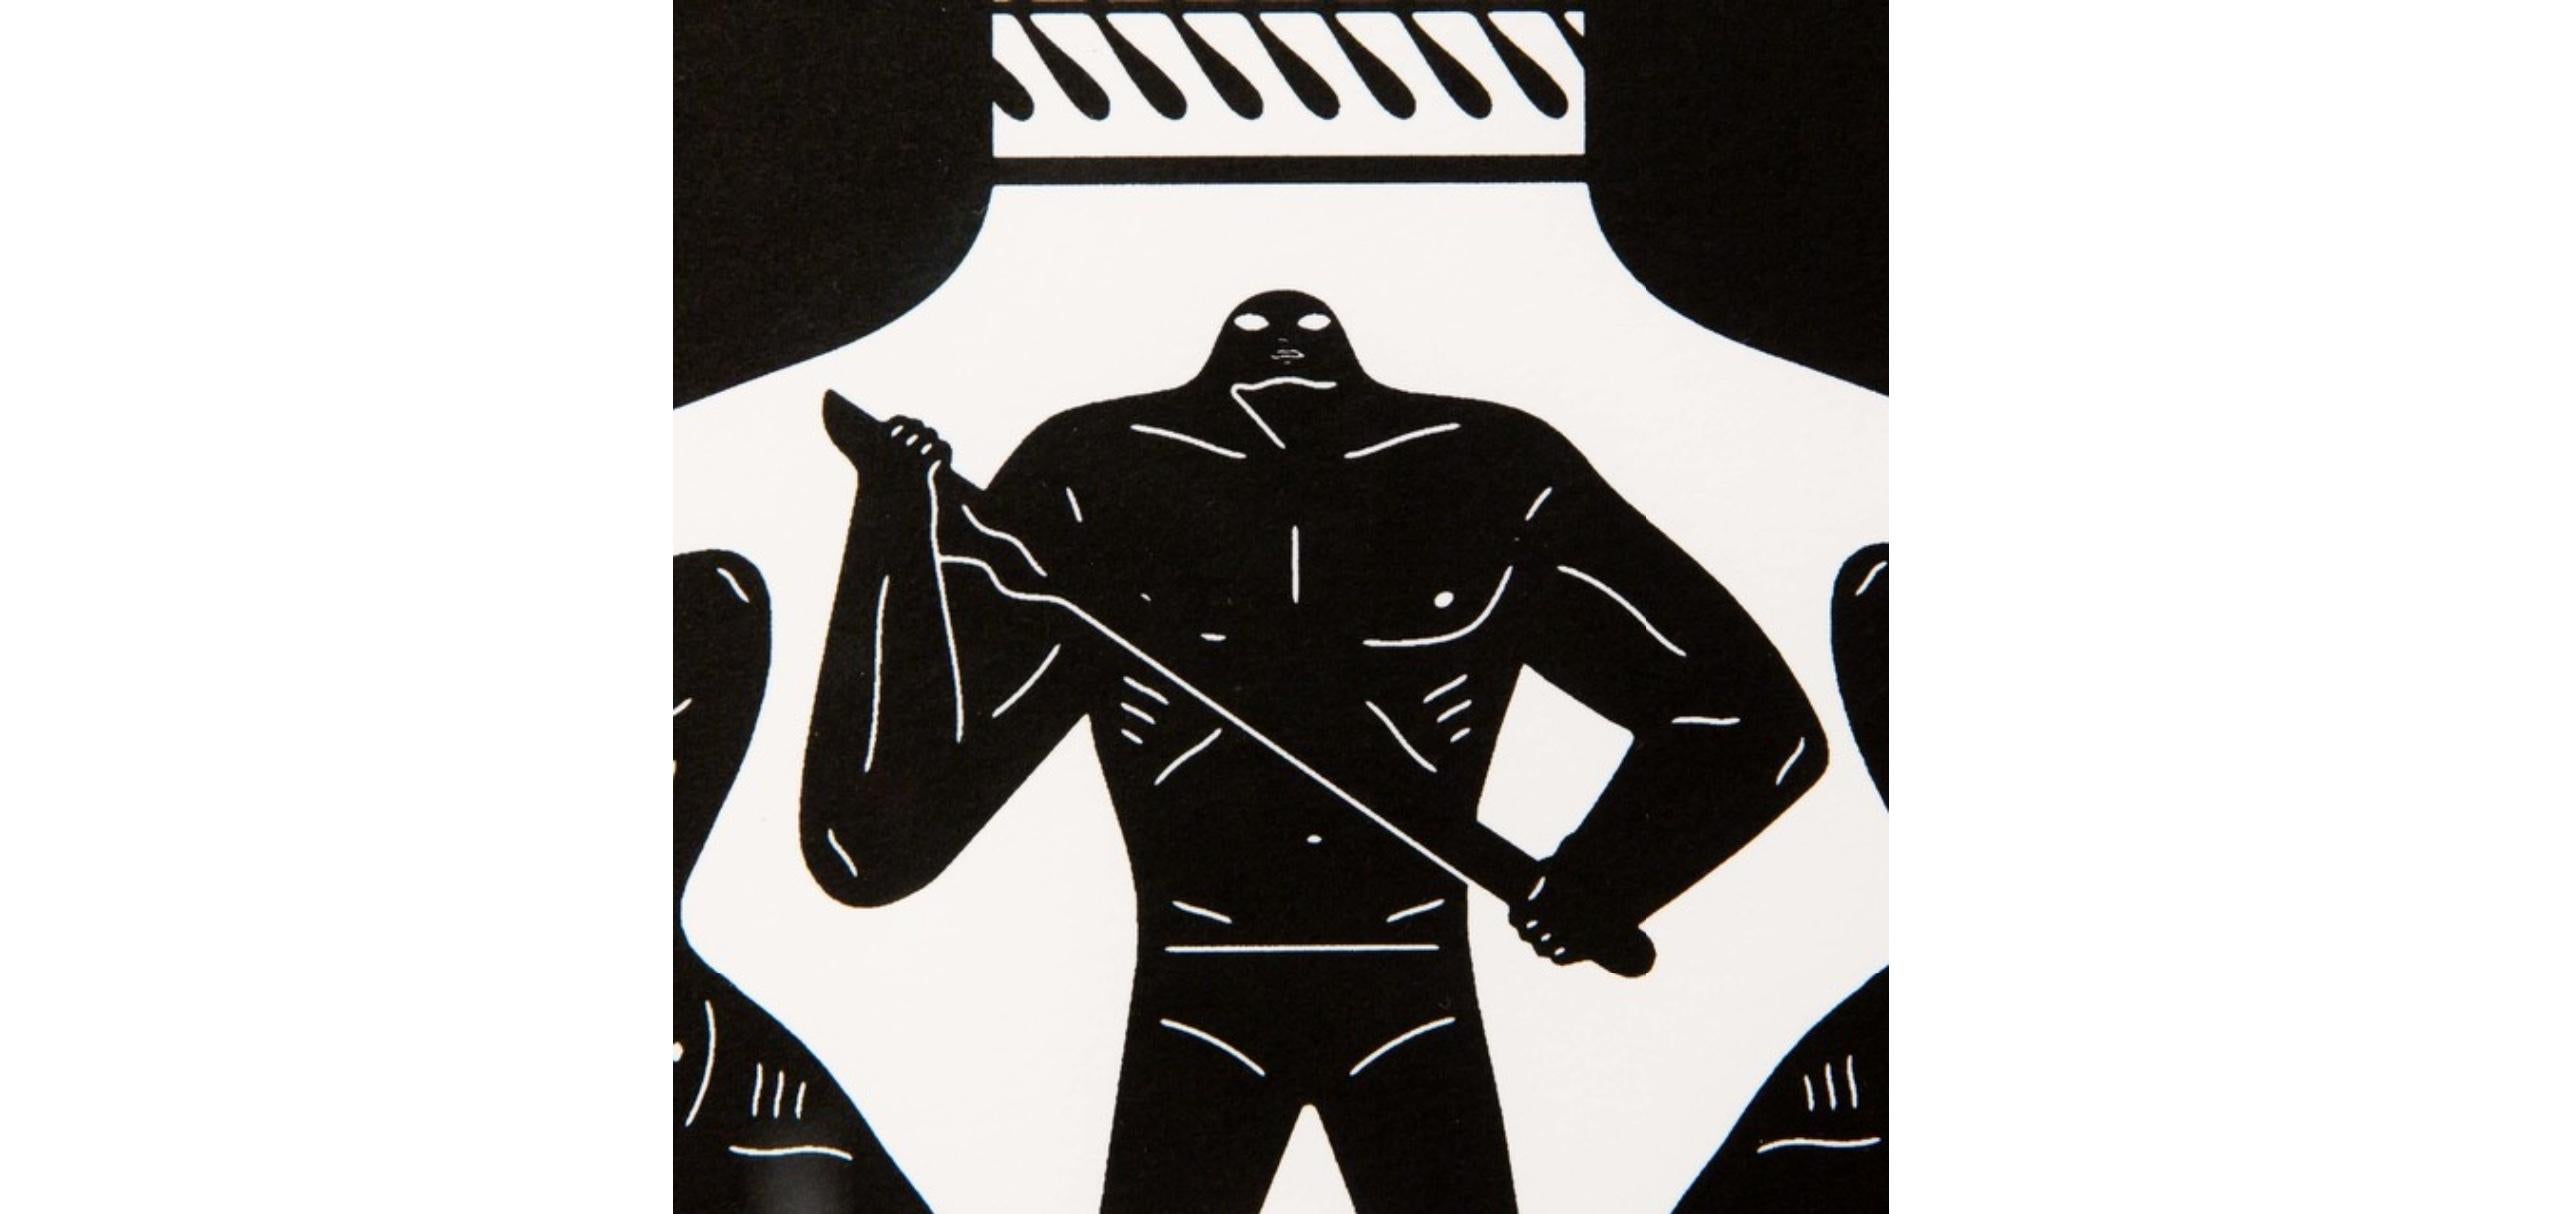 Cleon Peterson
Aryballos , 2018 
Screenprint on 290gsm Coventry rag paper with deckled edges
40.5 x 40.5 cm  
Edition of 150

Cleon Peterson is a contemporary American artist known for his bold and provocative paintings that explore themes of power,